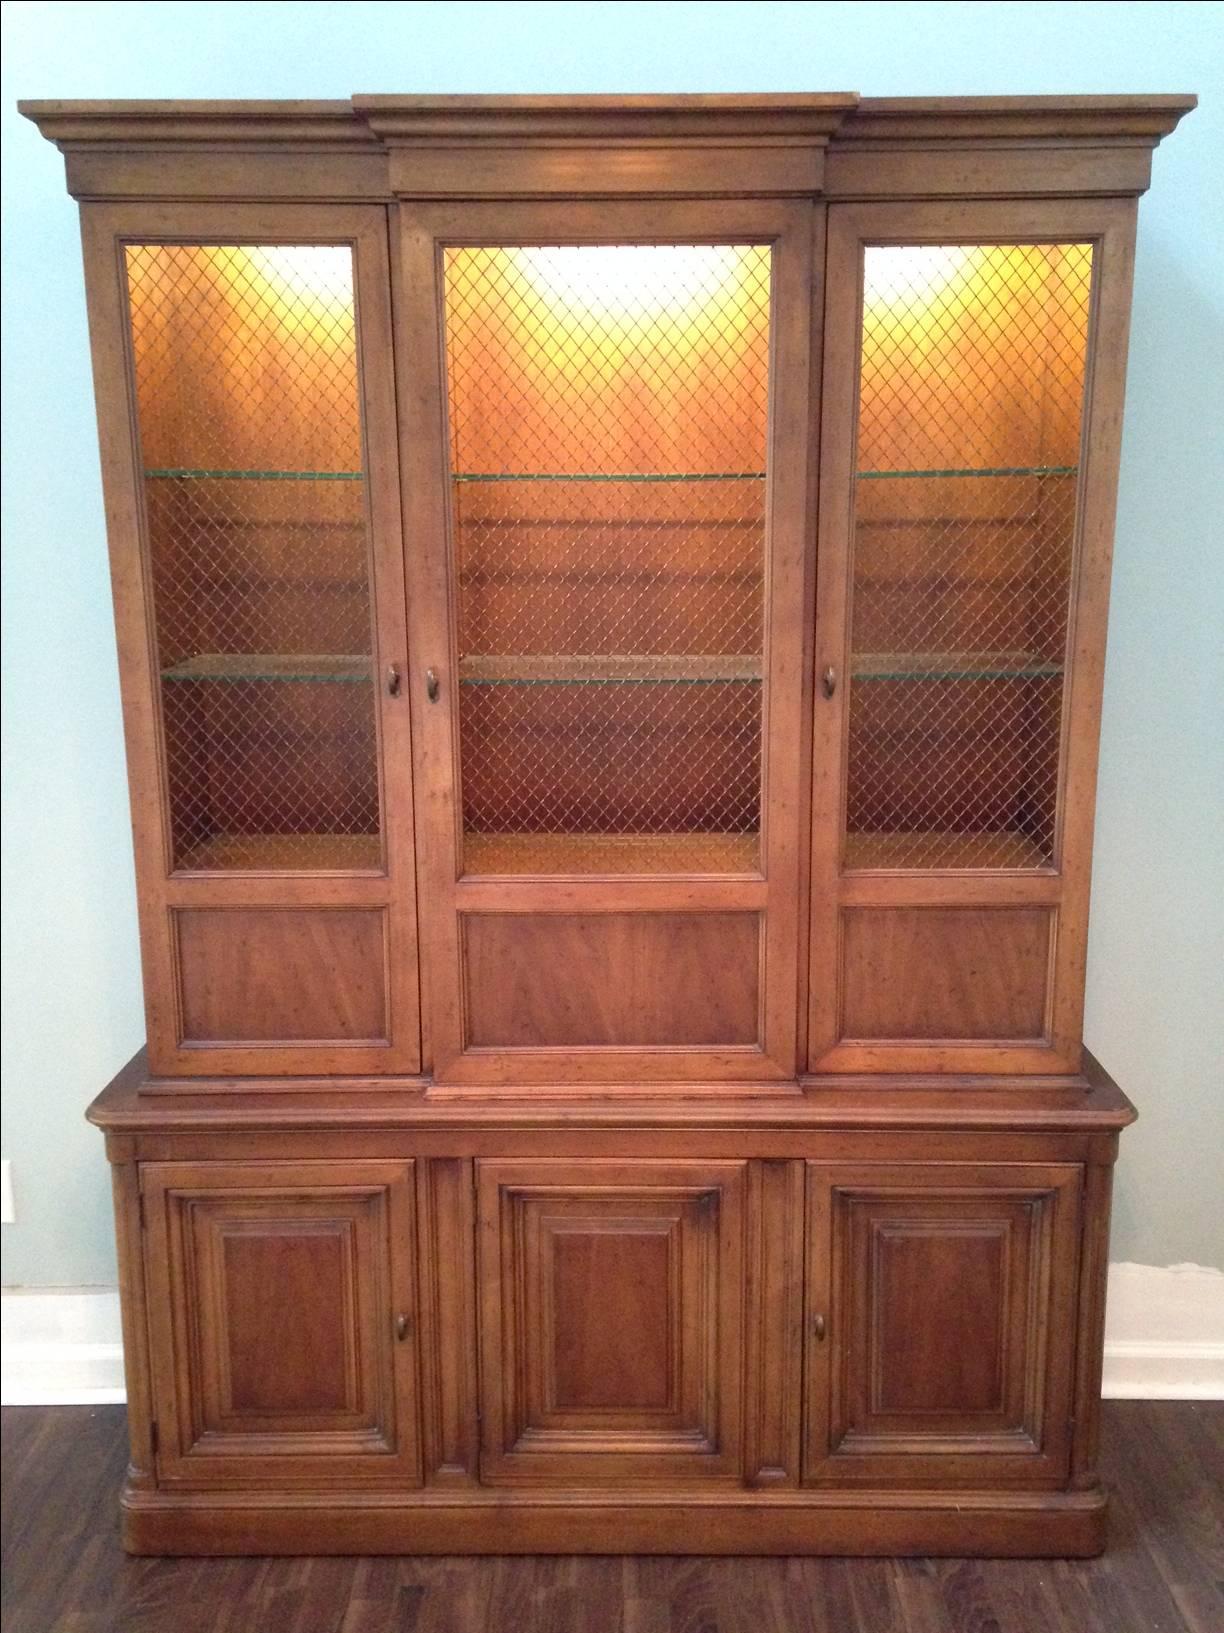 Drexel Heritage China hutch features cabinet lighting, glass shelves and drawers with silverware storage. Two pieces. Made from Maple wood.
Good vintage condition with minor imperfections consistent with age.
